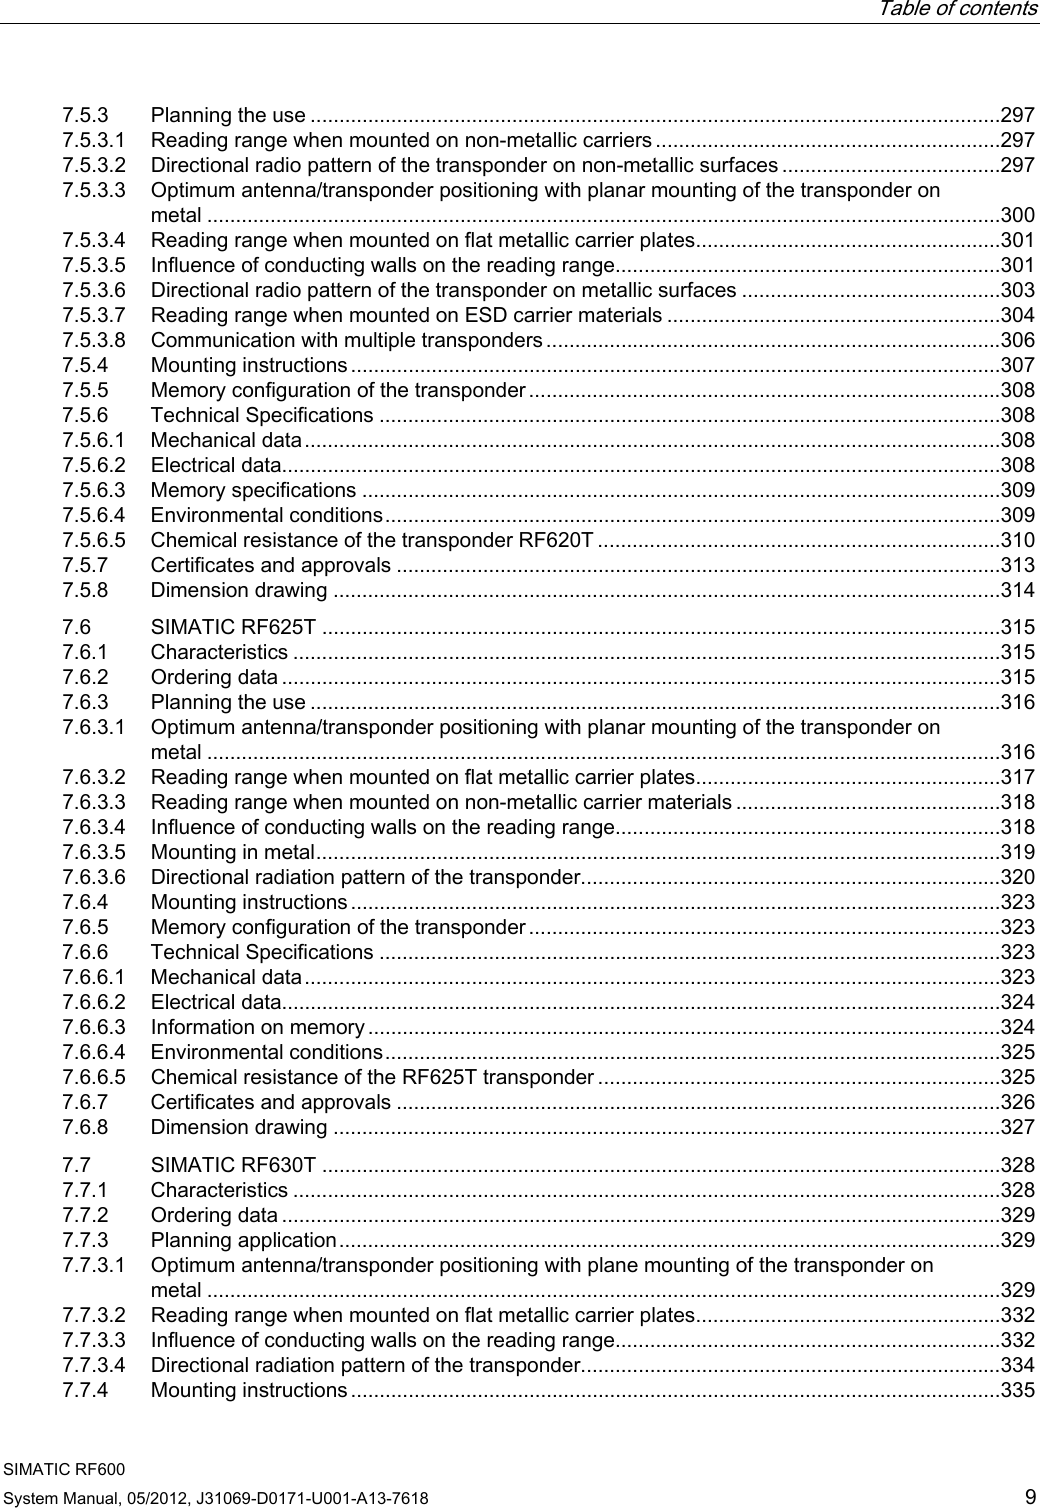   Table of contents   SIMATIC RF600 System Manual, 05/2012, J31069-D0171-U001-A13-7618  9 7.5.3  Planning the use ........................................................................................................................297 7.5.3.1  Reading range when mounted on non-metallic carriers............................................................297 7.5.3.2  Directional radio pattern of the transponder on non-metallic surfaces ......................................297 7.5.3.3  Optimum antenna/transponder positioning with planar mounting of the transponder on metal ..........................................................................................................................................300 7.5.3.4  Reading range when mounted on flat metallic carrier plates.....................................................301 7.5.3.5  Influence of conducting walls on the reading range...................................................................301 7.5.3.6  Directional radio pattern of the transponder on metallic surfaces .............................................303 7.5.3.7  Reading range when mounted on ESD carrier materials ..........................................................304 7.5.3.8  Communication with multiple transponders ...............................................................................306 7.5.4  Mounting instructions .................................................................................................................307 7.5.5  Memory configuration of the transponder ..................................................................................308 7.5.6  Technical Specifications ............................................................................................................308 7.5.6.1  Mechanical data.........................................................................................................................308 7.5.6.2  Electrical data.............................................................................................................................308 7.5.6.3  Memory specifications ...............................................................................................................309 7.5.6.4  Environmental conditions...........................................................................................................309 7.5.6.5  Chemical resistance of the transponder RF620T ......................................................................310 7.5.7  Certificates and approvals .........................................................................................................313 7.5.8  Dimension drawing ....................................................................................................................314 7.6  SIMATIC RF625T ......................................................................................................................315 7.6.1  Characteristics ...........................................................................................................................315 7.6.2  Ordering data .............................................................................................................................315 7.6.3  Planning the use ........................................................................................................................316 7.6.3.1  Optimum antenna/transponder positioning with planar mounting of the transponder on metal ..........................................................................................................................................316 7.6.3.2  Reading range when mounted on flat metallic carrier plates.....................................................317 7.6.3.3  Reading range when mounted on non-metallic carrier materials ..............................................318 7.6.3.4  Influence of conducting walls on the reading range...................................................................318 7.6.3.5  Mounting in metal.......................................................................................................................319 7.6.3.6  Directional radiation pattern of the transponder.........................................................................320 7.6.4  Mounting instructions .................................................................................................................323 7.6.5  Memory configuration of the transponder ..................................................................................323 7.6.6  Technical Specifications ............................................................................................................323 7.6.6.1  Mechanical data.........................................................................................................................323 7.6.6.2  Electrical data.............................................................................................................................324 7.6.6.3  Information on memory..............................................................................................................324 7.6.6.4  Environmental conditions...........................................................................................................325 7.6.6.5  Chemical resistance of the RF625T transponder ......................................................................325 7.6.7  Certificates and approvals .........................................................................................................326 7.6.8  Dimension drawing ....................................................................................................................327 7.7  SIMATIC RF630T ......................................................................................................................328 7.7.1  Characteristics ...........................................................................................................................328 7.7.2  Ordering data .............................................................................................................................329 7.7.3  Planning application...................................................................................................................329 7.7.3.1  Optimum antenna/transponder positioning with plane mounting of the transponder on metal ..........................................................................................................................................329 7.7.3.2  Reading range when mounted on flat metallic carrier plates.....................................................332 7.7.3.3  Influence of conducting walls on the reading range...................................................................332 7.7.3.4  Directional radiation pattern of the transponder.........................................................................334 7.7.4  Mounting instructions .................................................................................................................335 